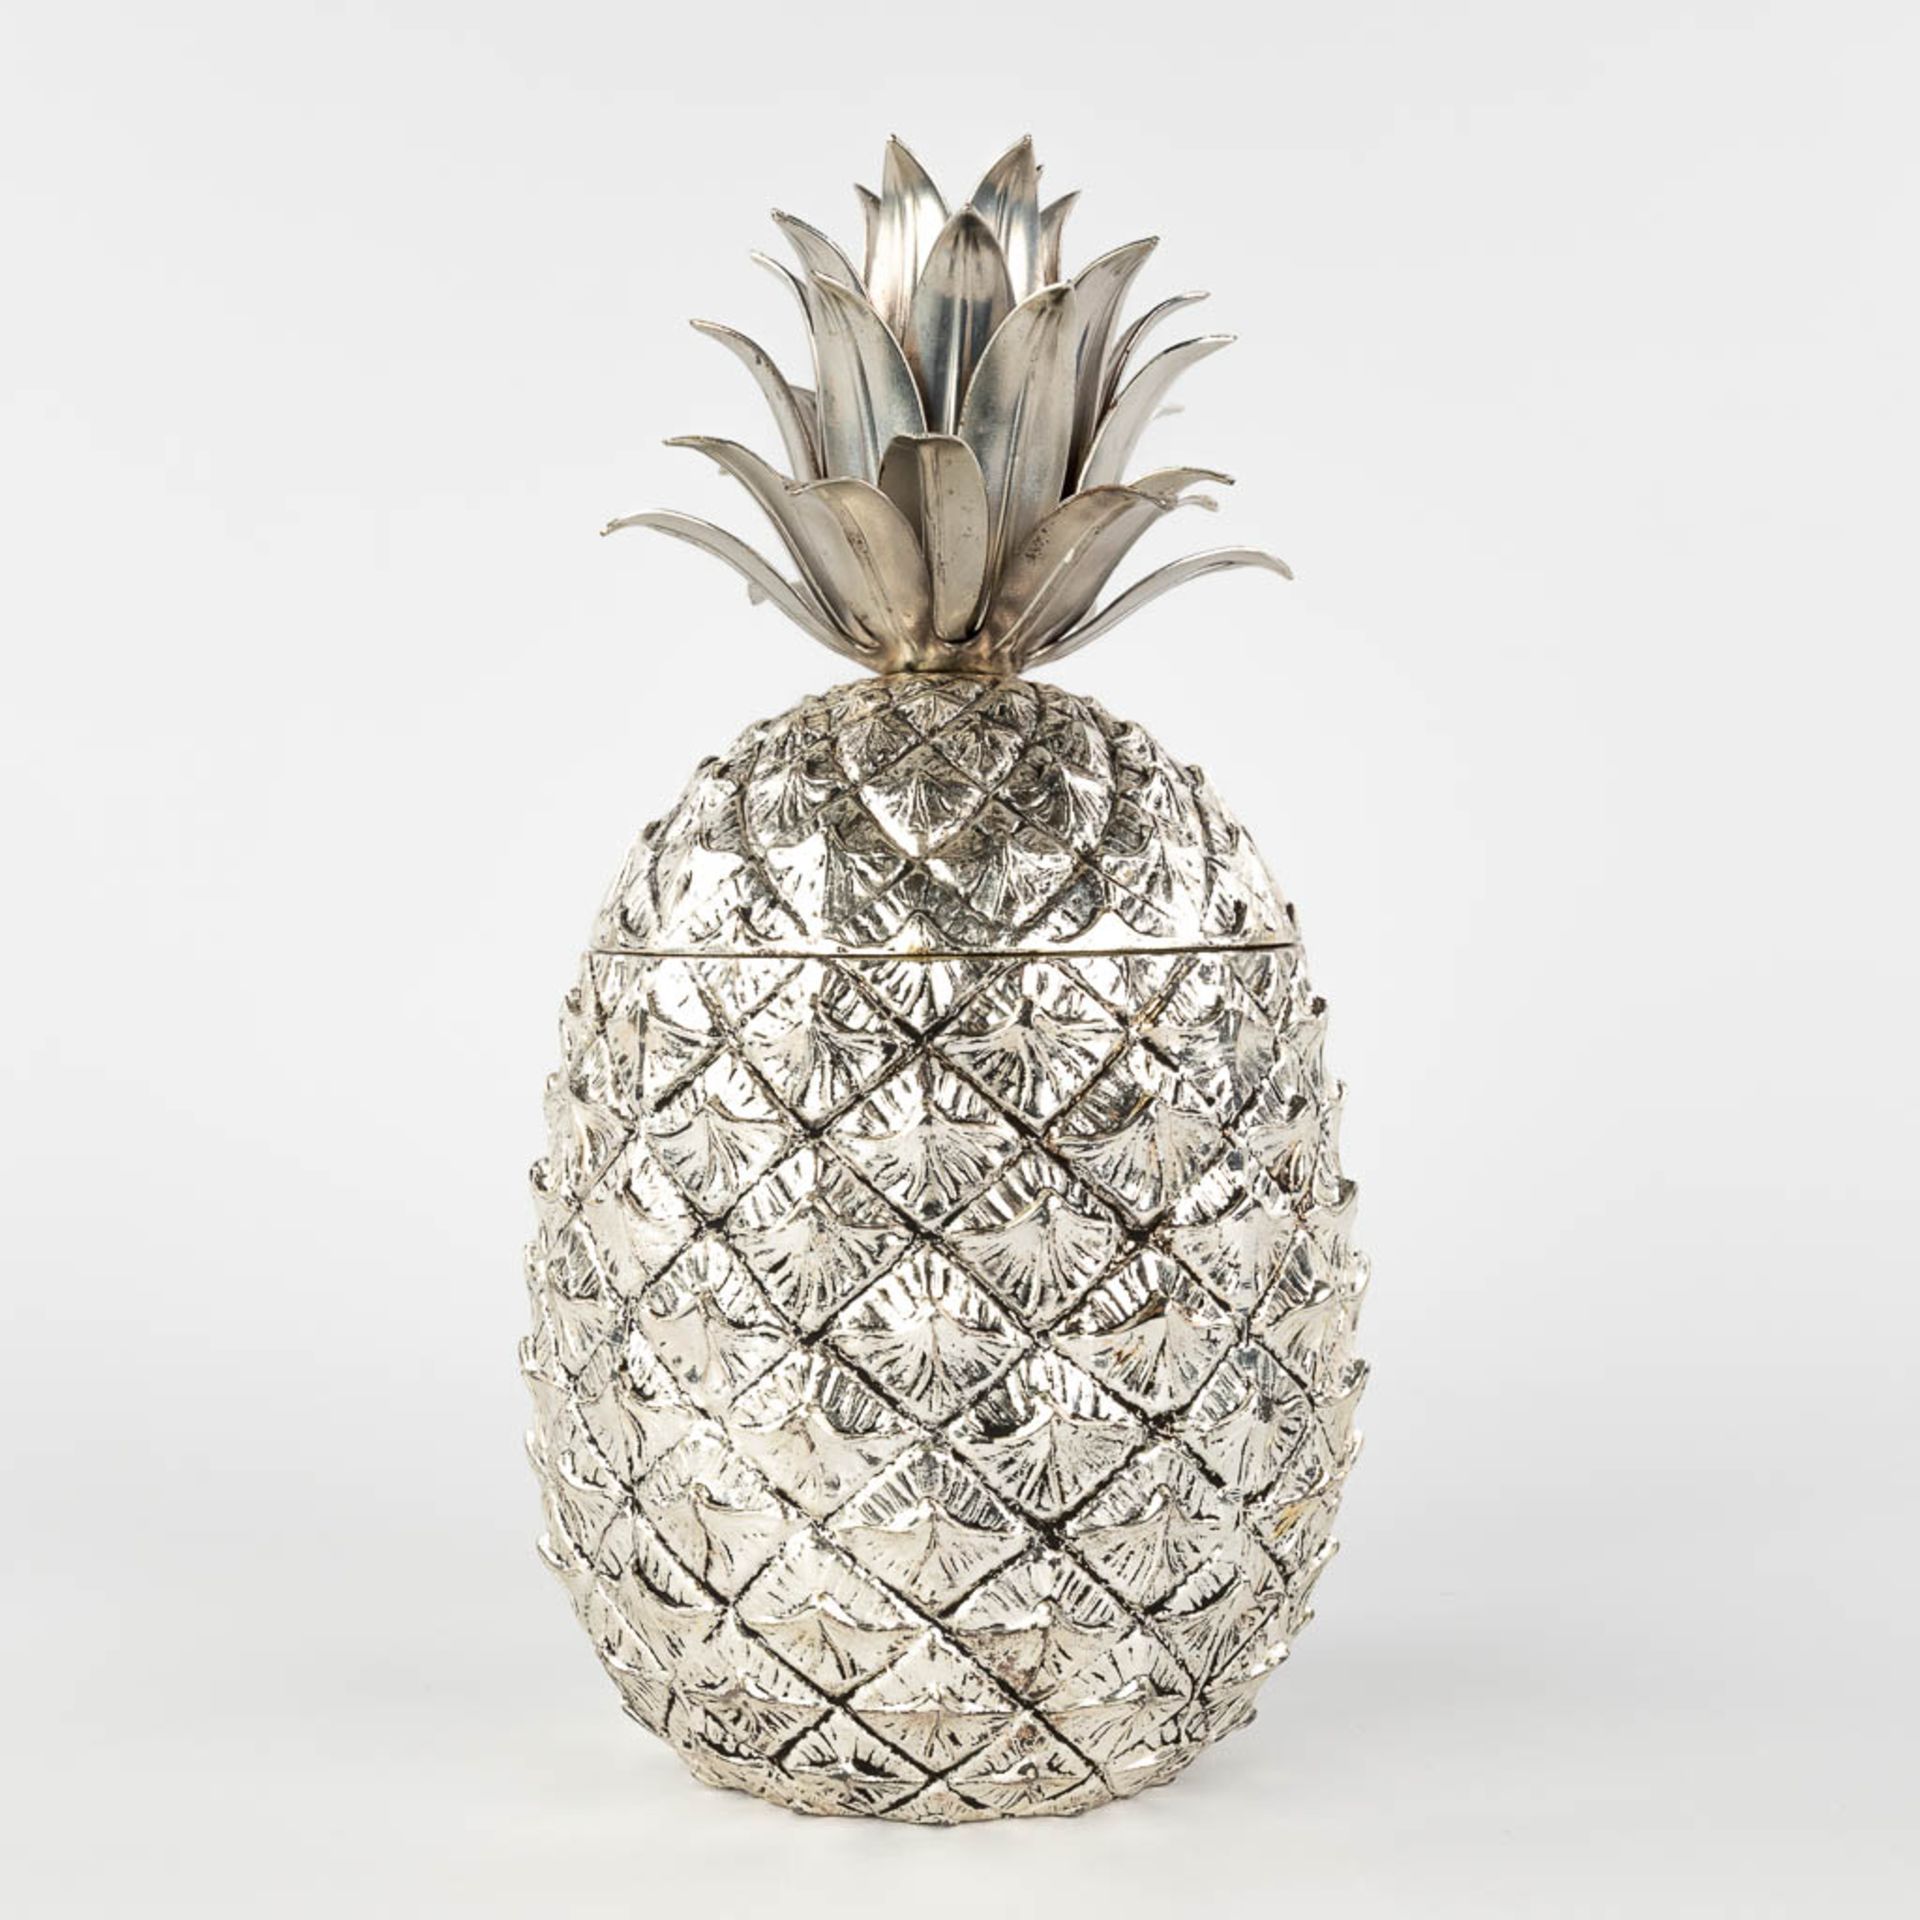 Mauro MANETTI (1946) 'Pineapple' an ice pail. (H:27 x D:13 cm) - Image 4 of 10